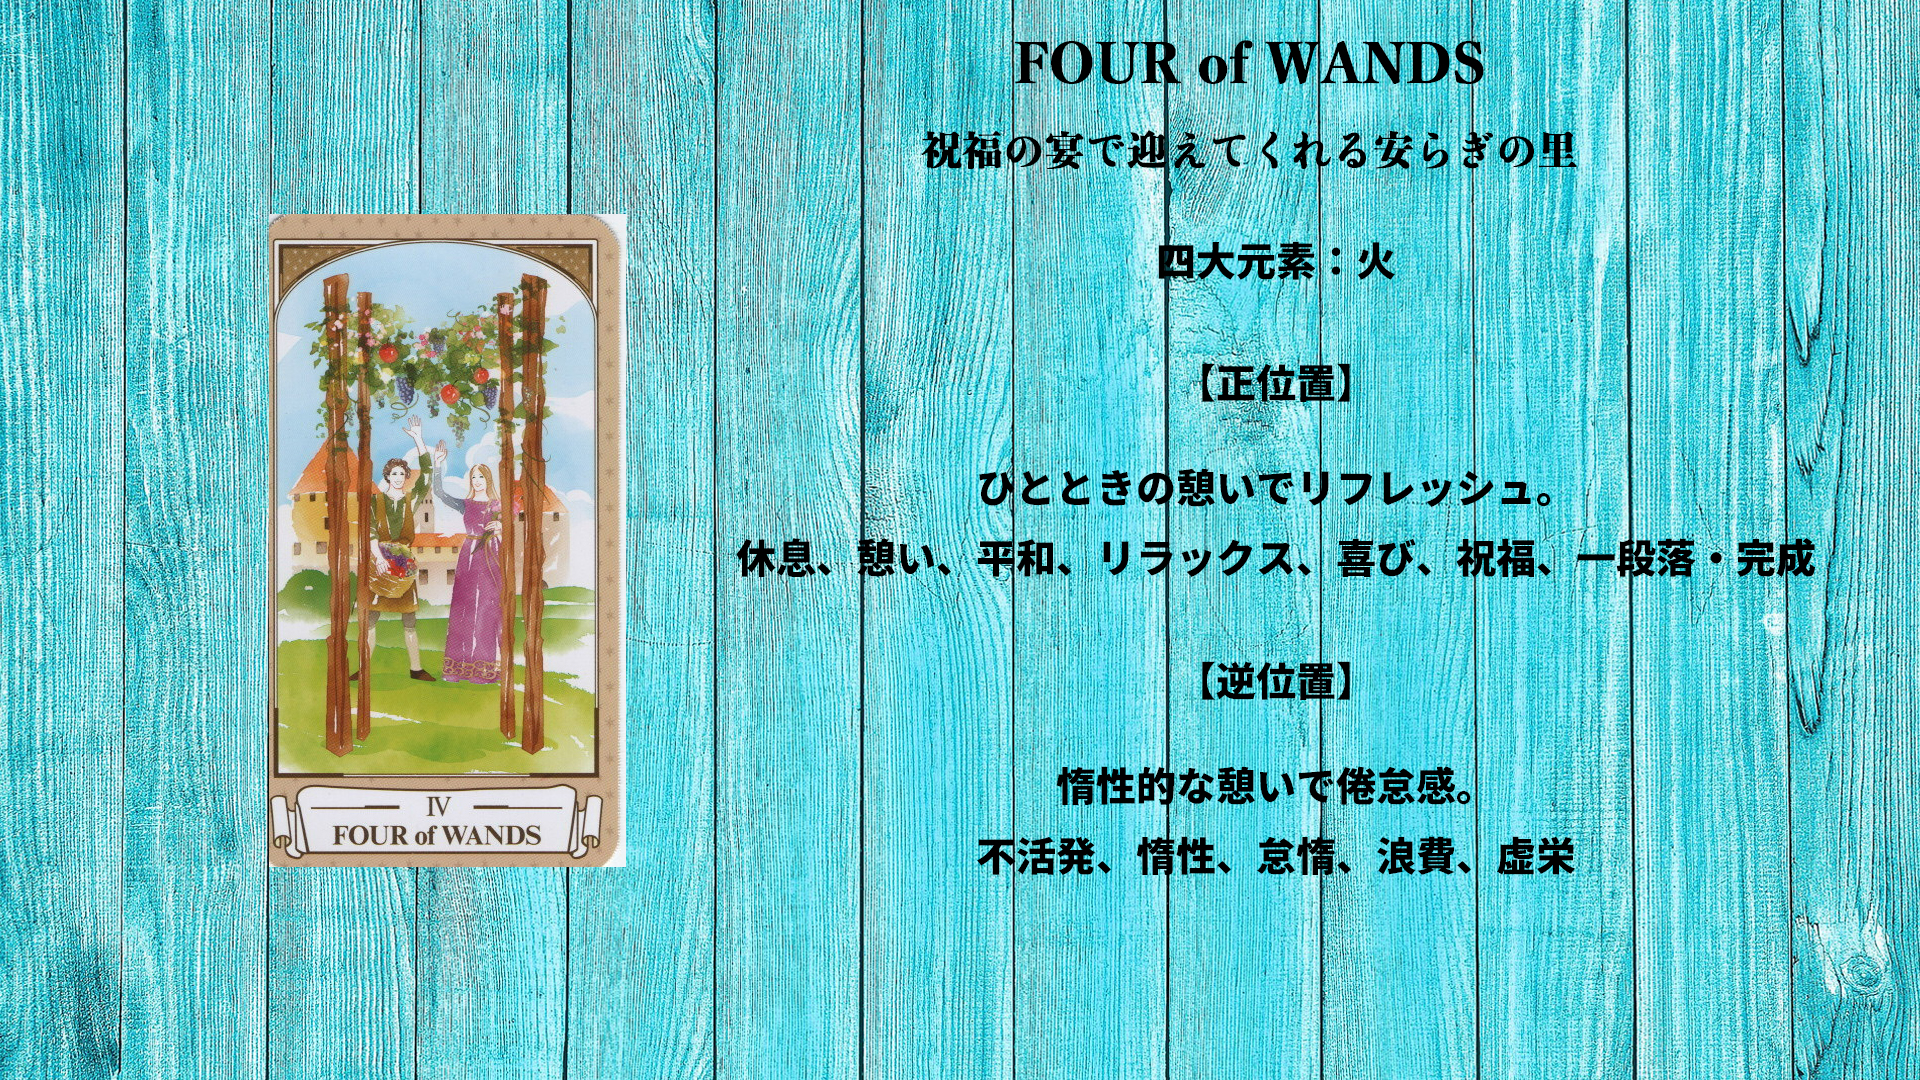 25_FOUR of WANDS